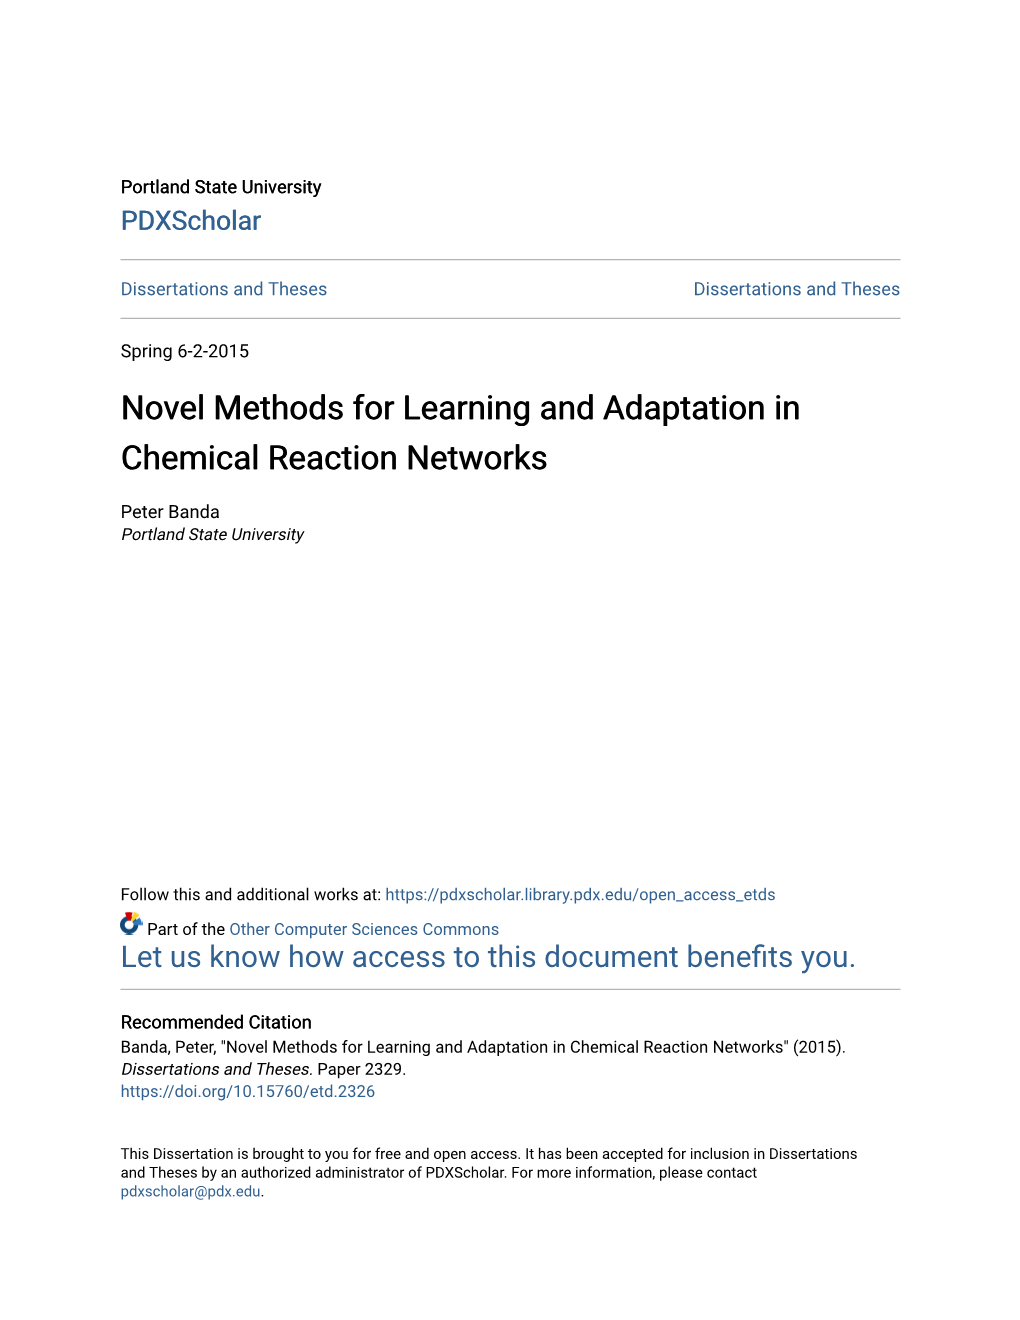 Novel Methods for Learning and Adaptation in Chemical Reaction Networks